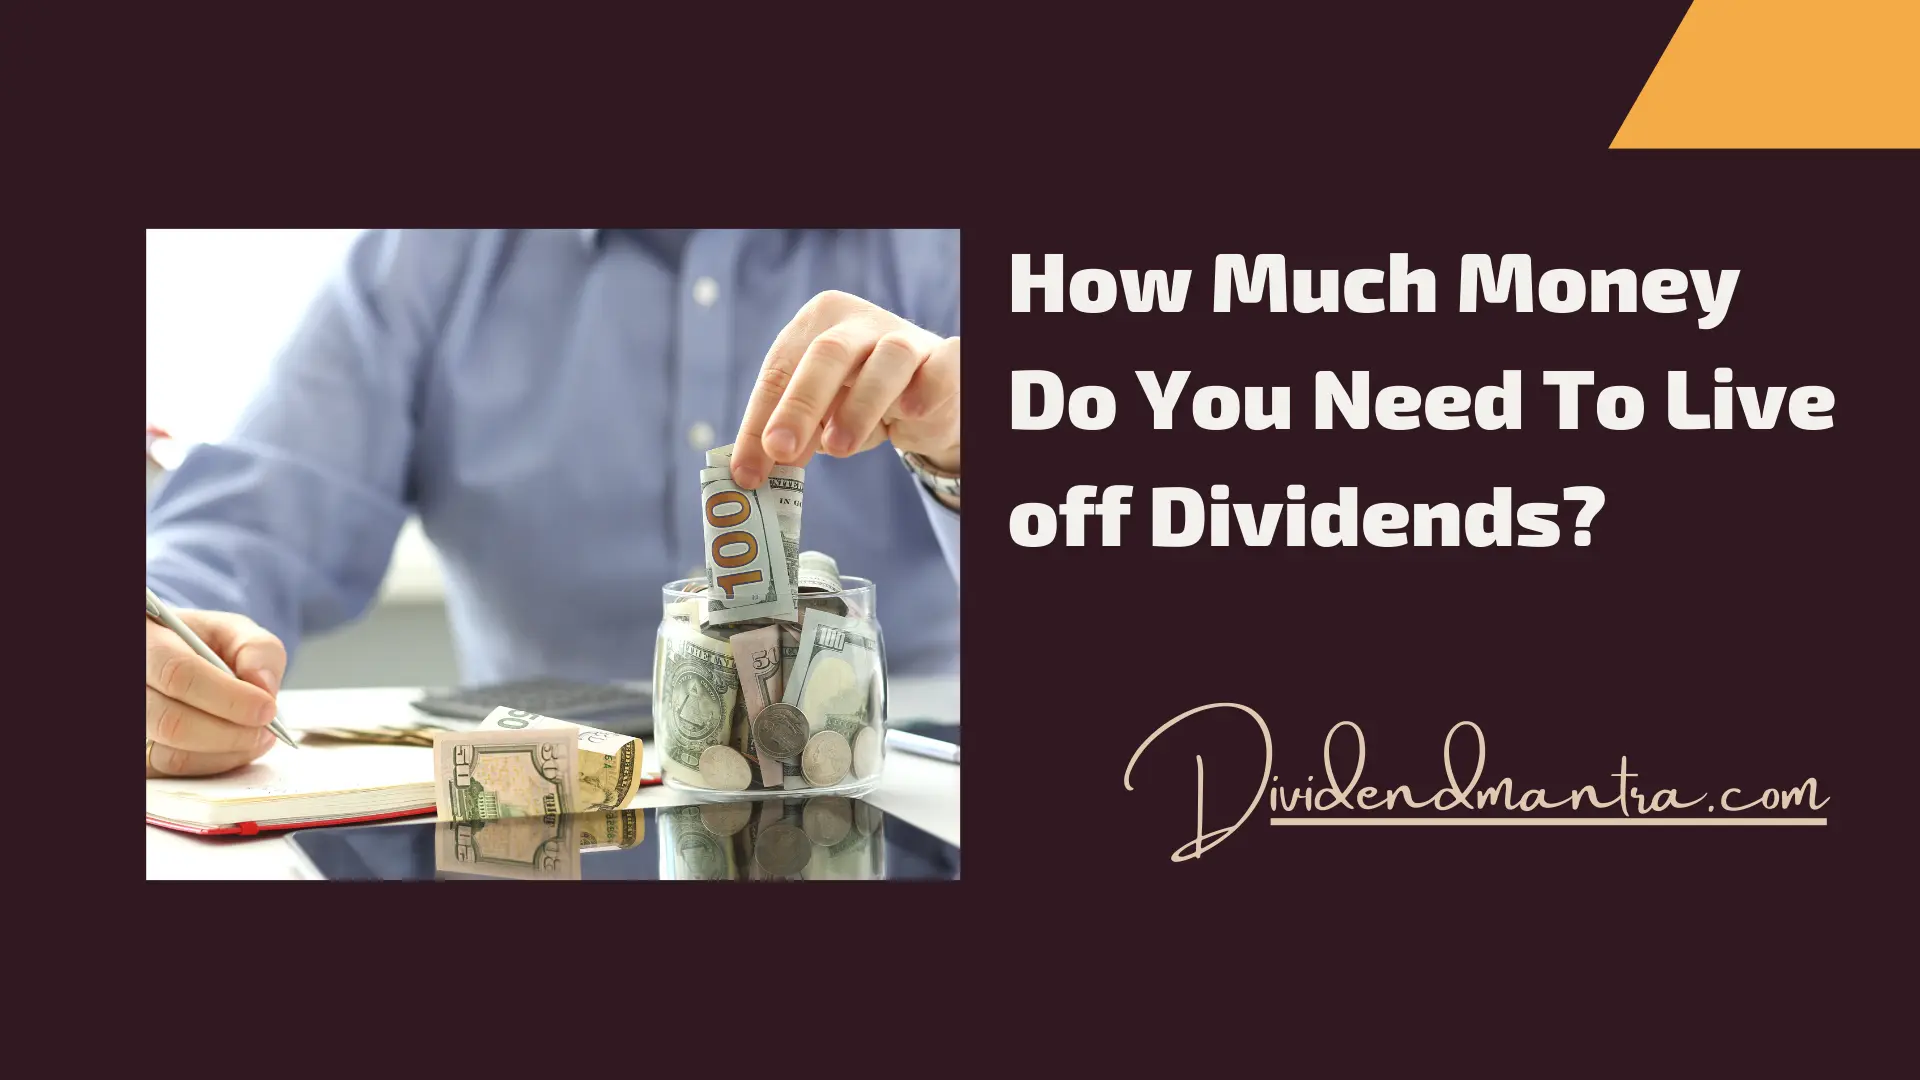 How Much Money Do You Need To Live off Dividends